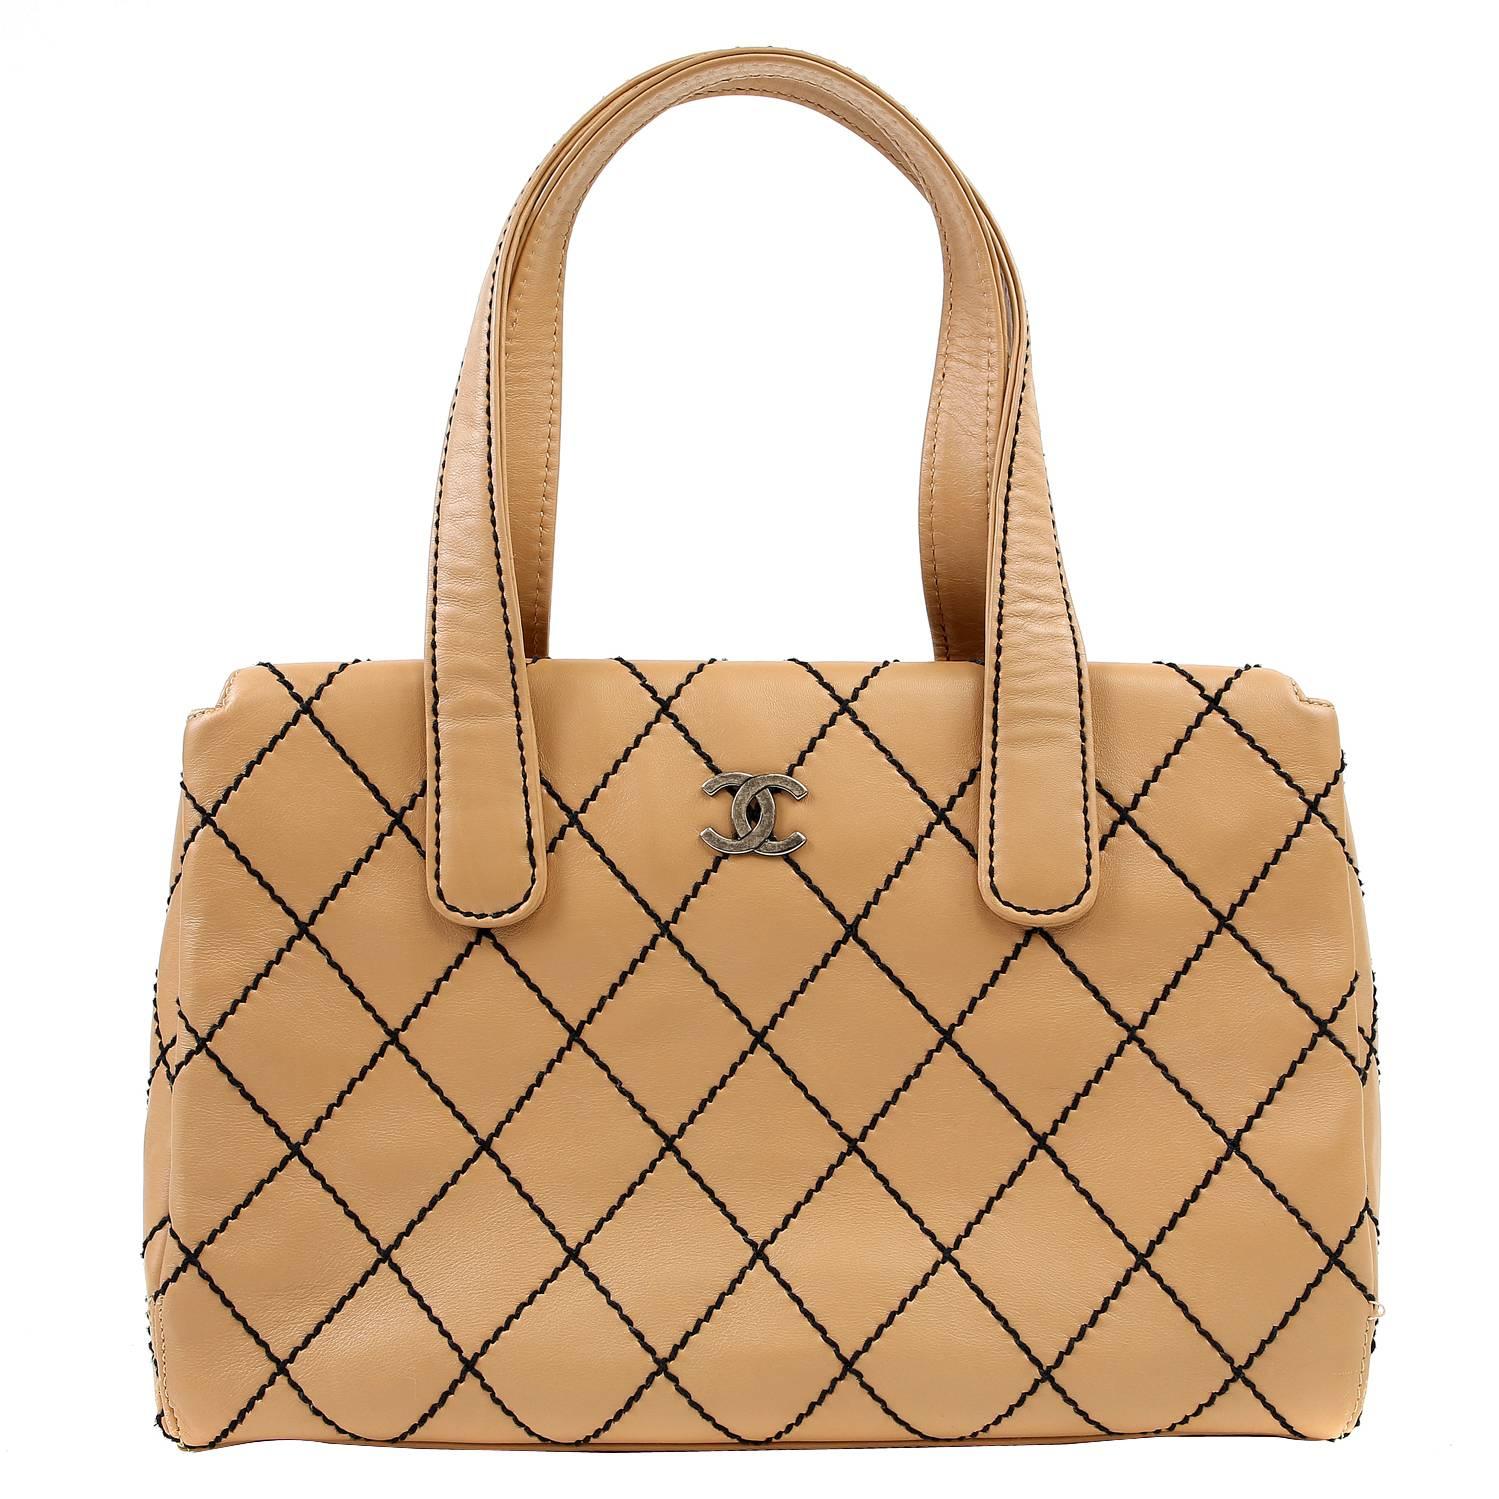 Chanel Beige Leather Tote with Black Top Stitching For Sale